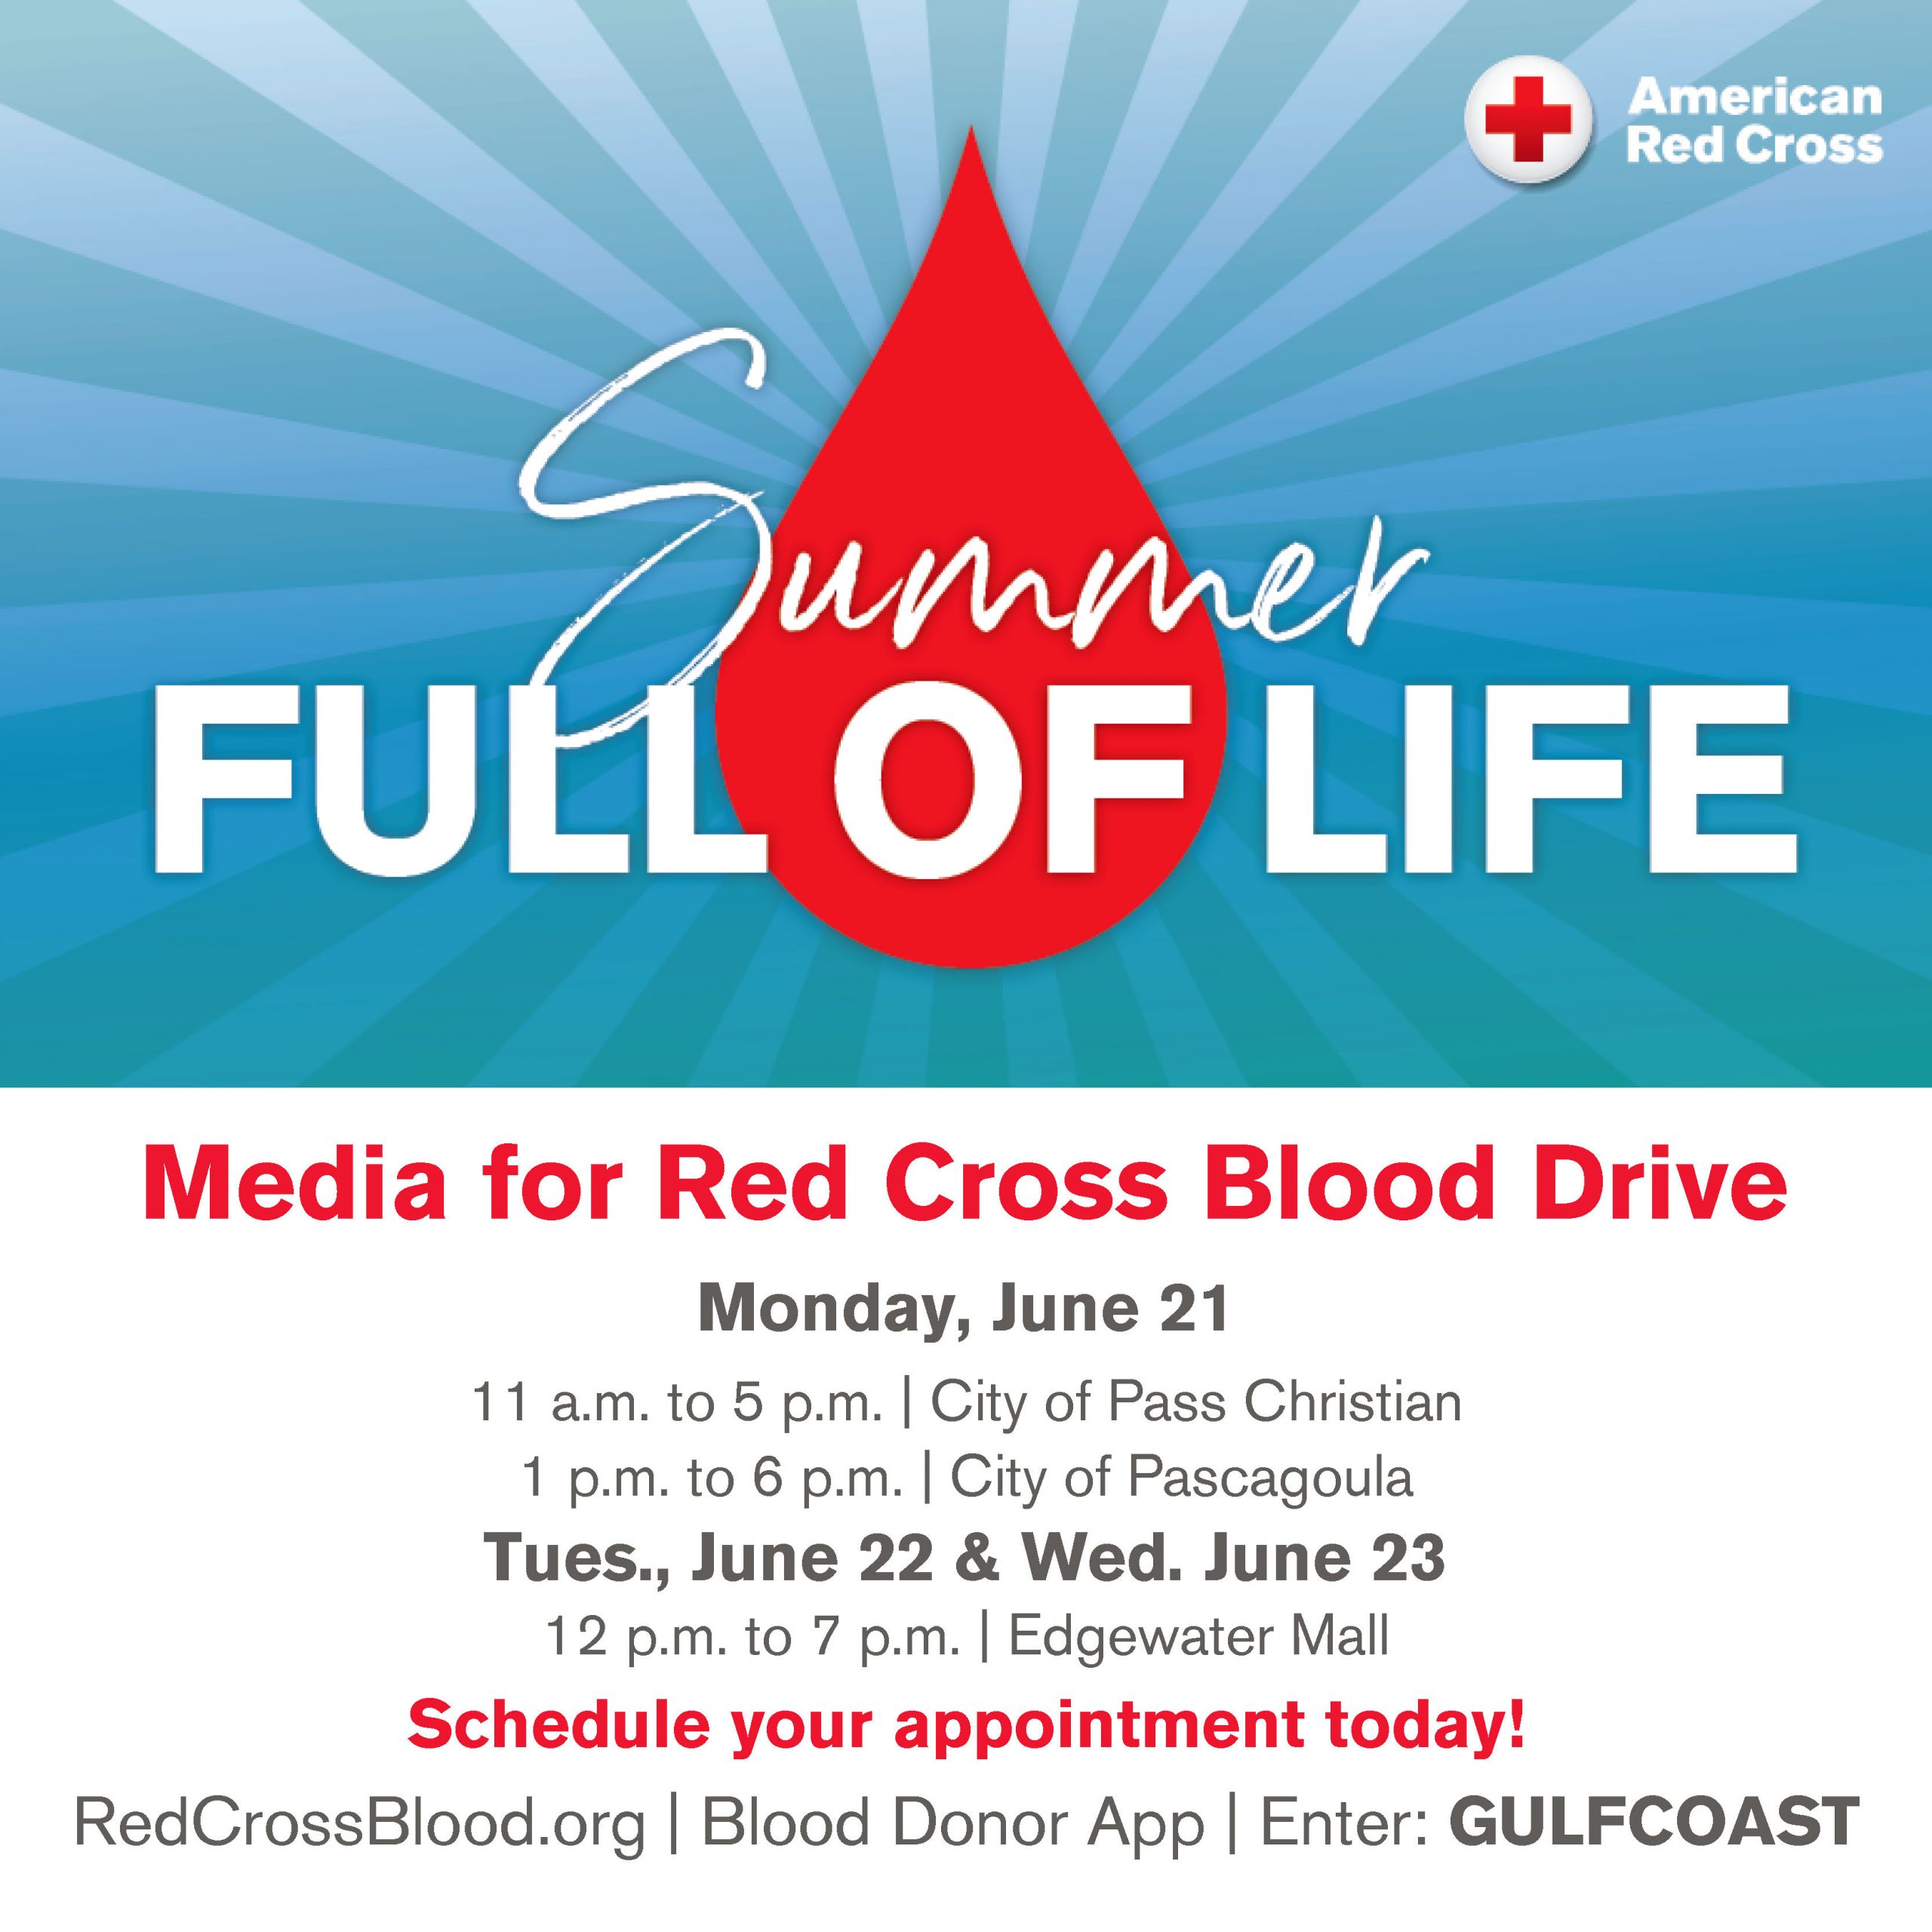 Flyer for a blood drive